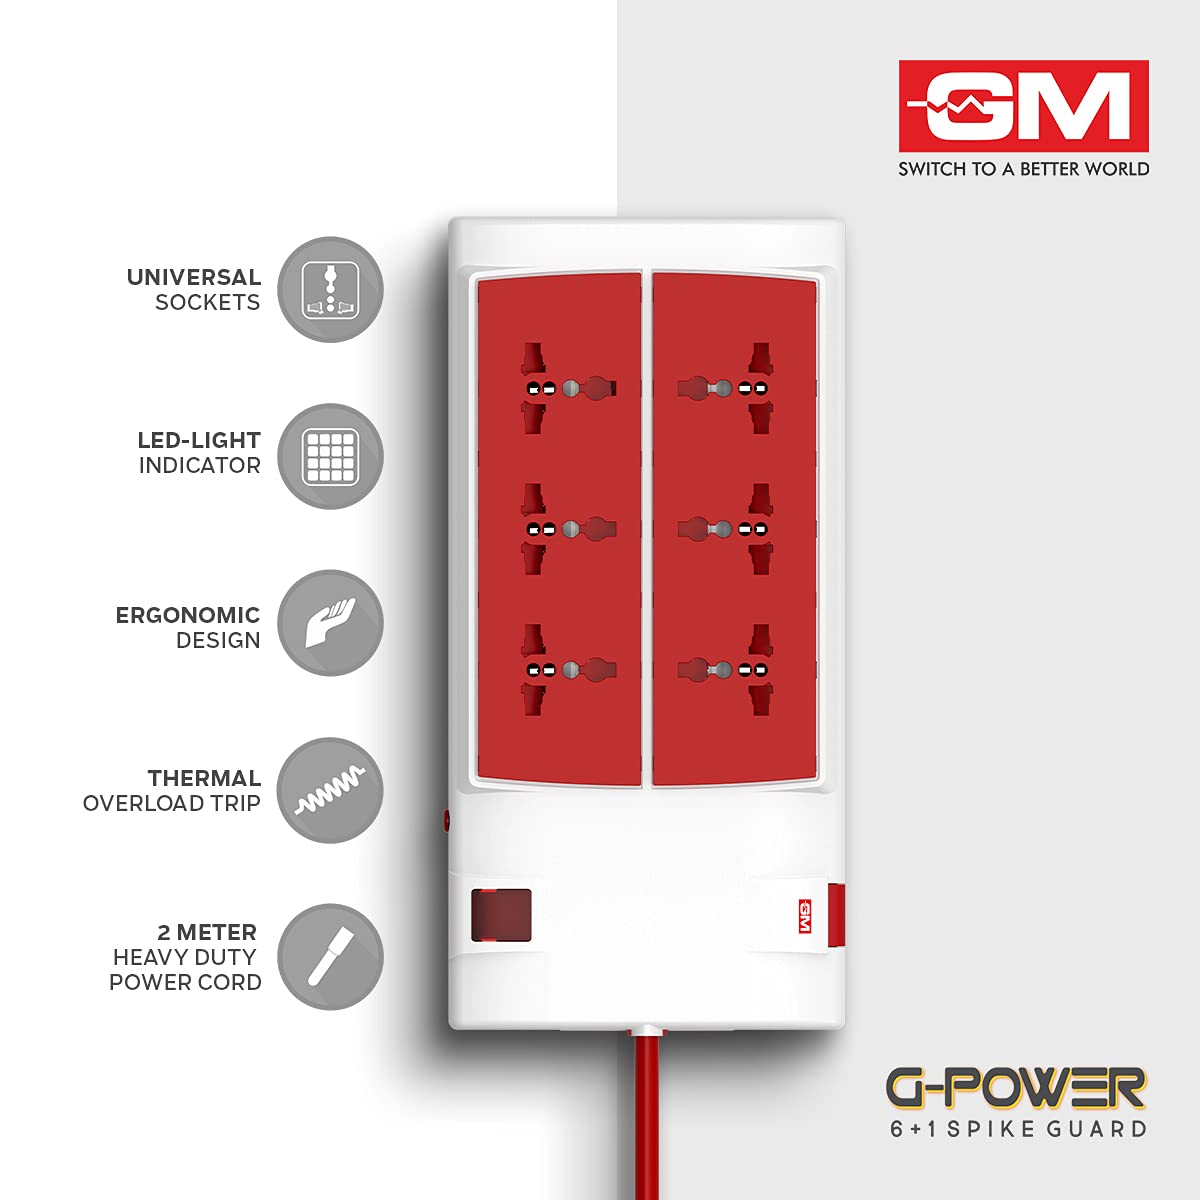 GM 3059 G-Power 6+1 Spike Adaptor with Master Switch, Indicator